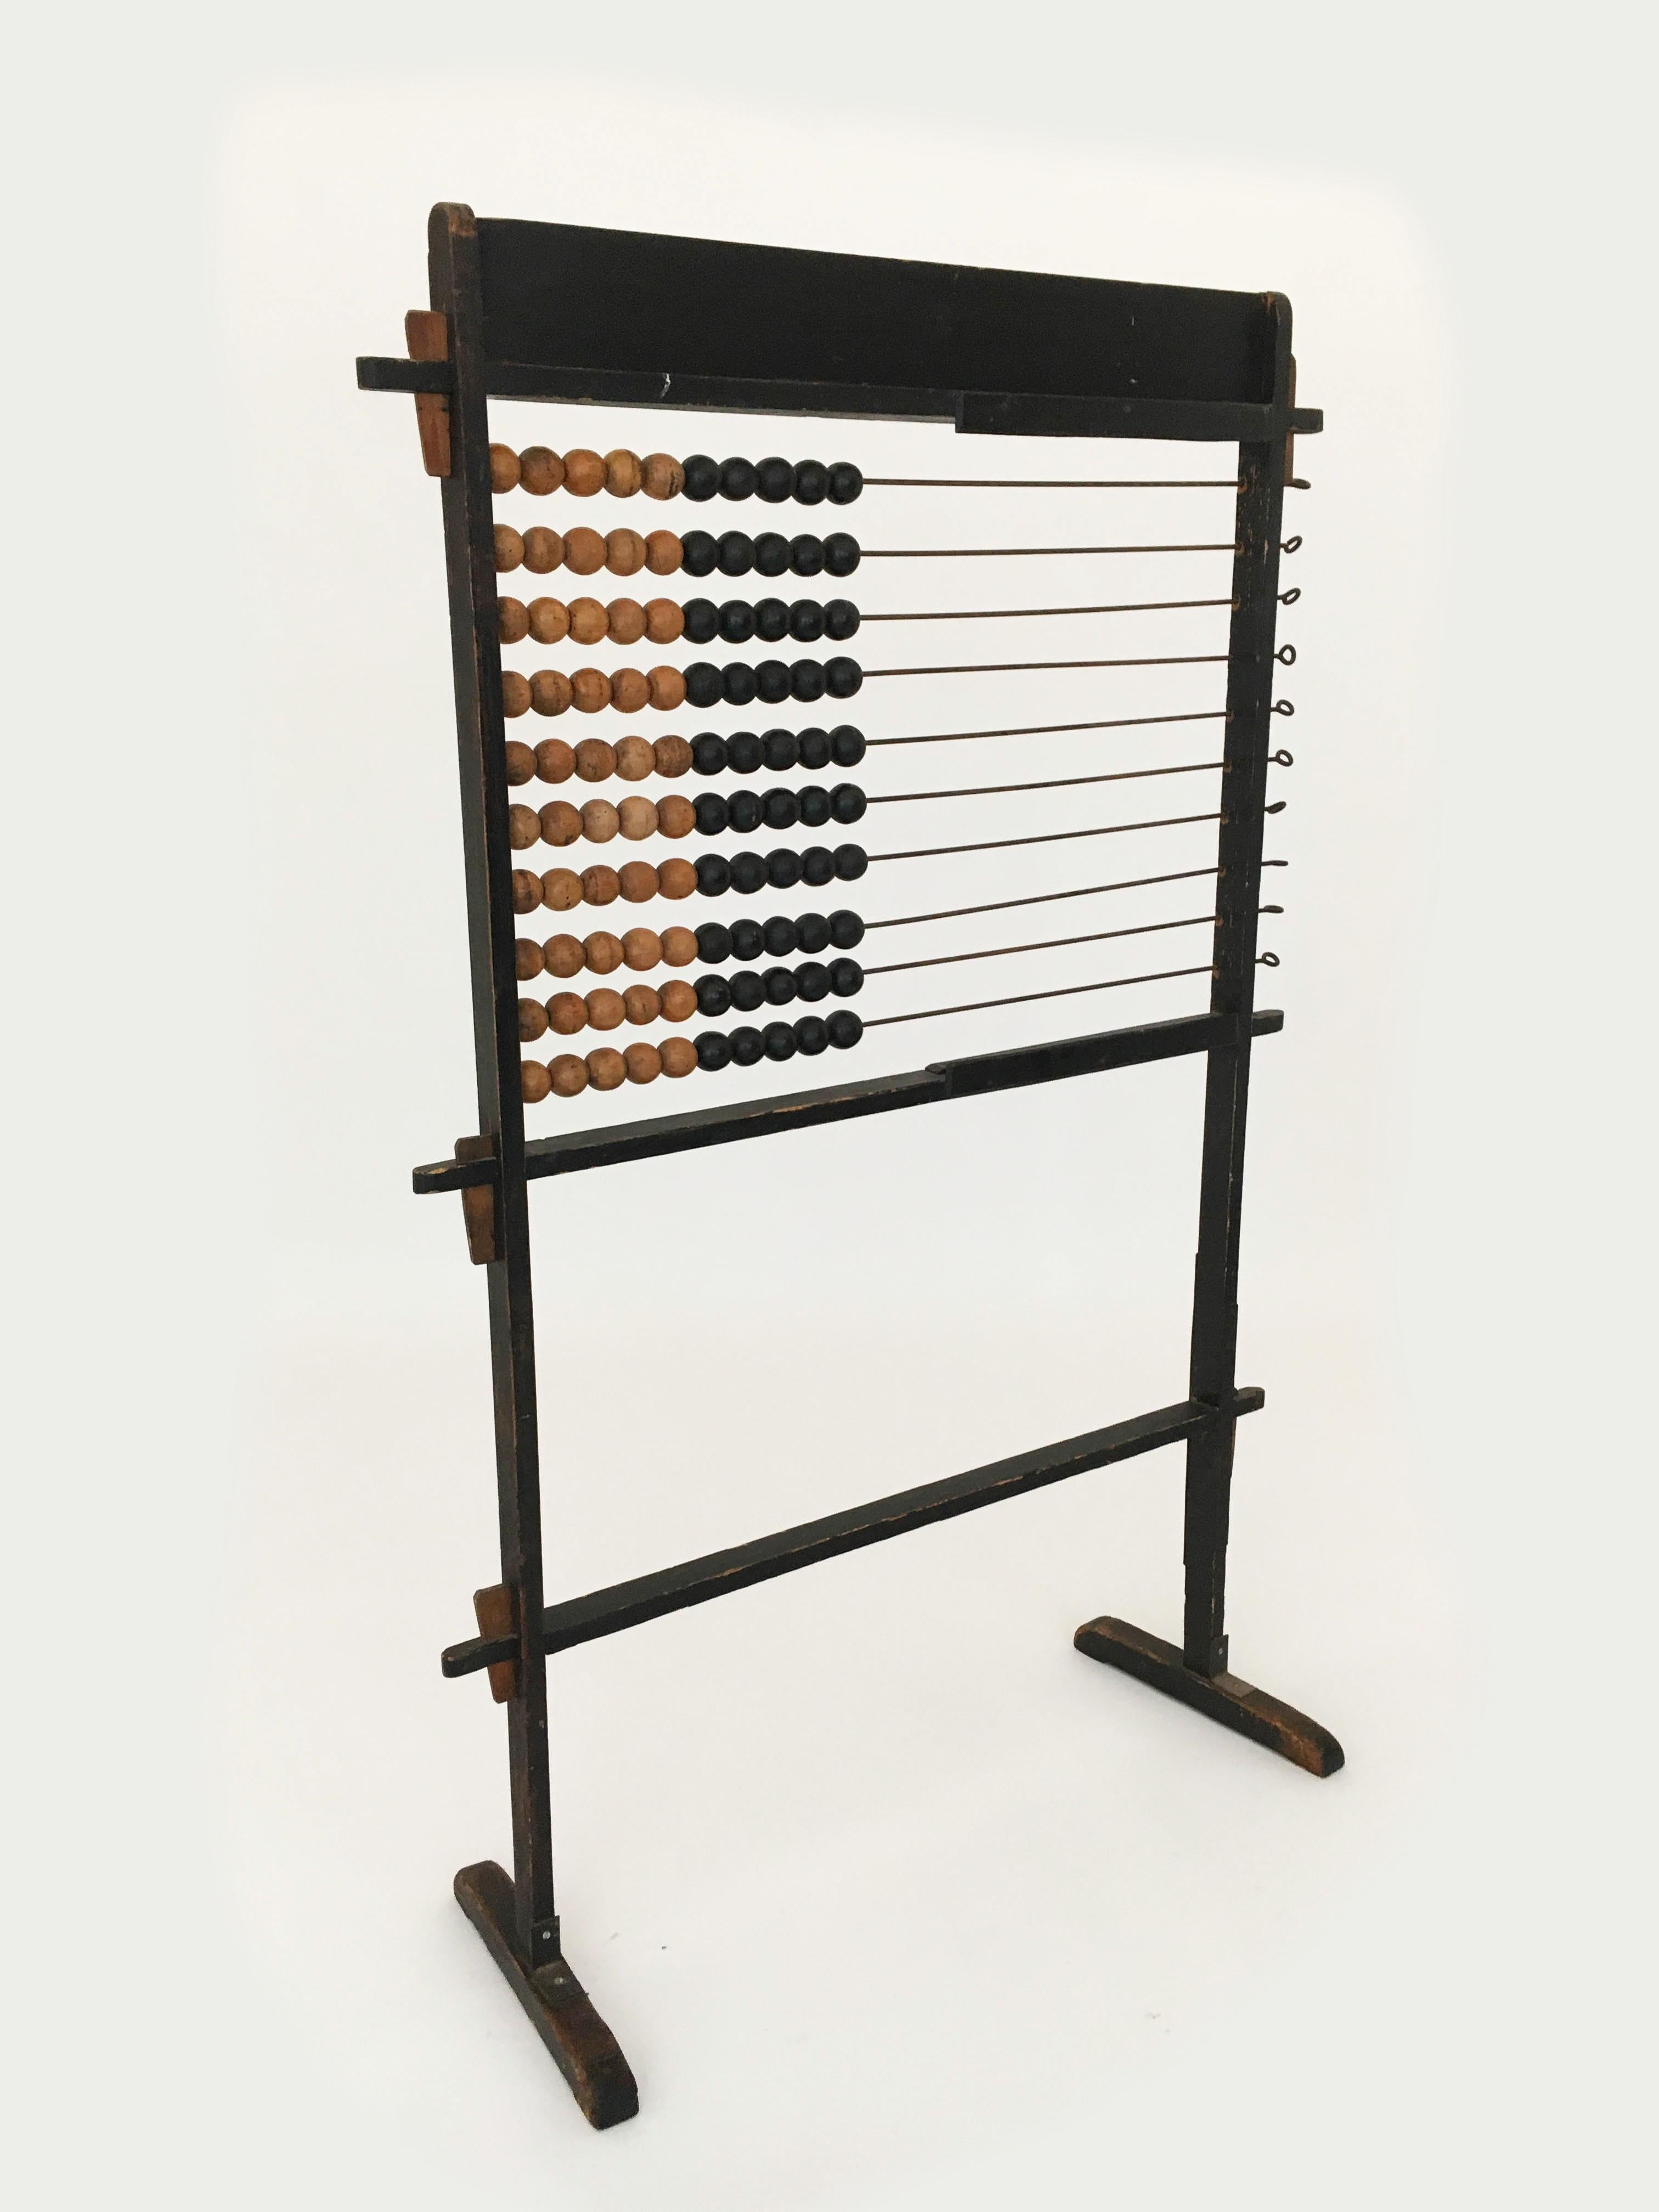 Form Follows Function Modern Abstract Abacus Obsolete Object, France, 1920s im Angebot 3